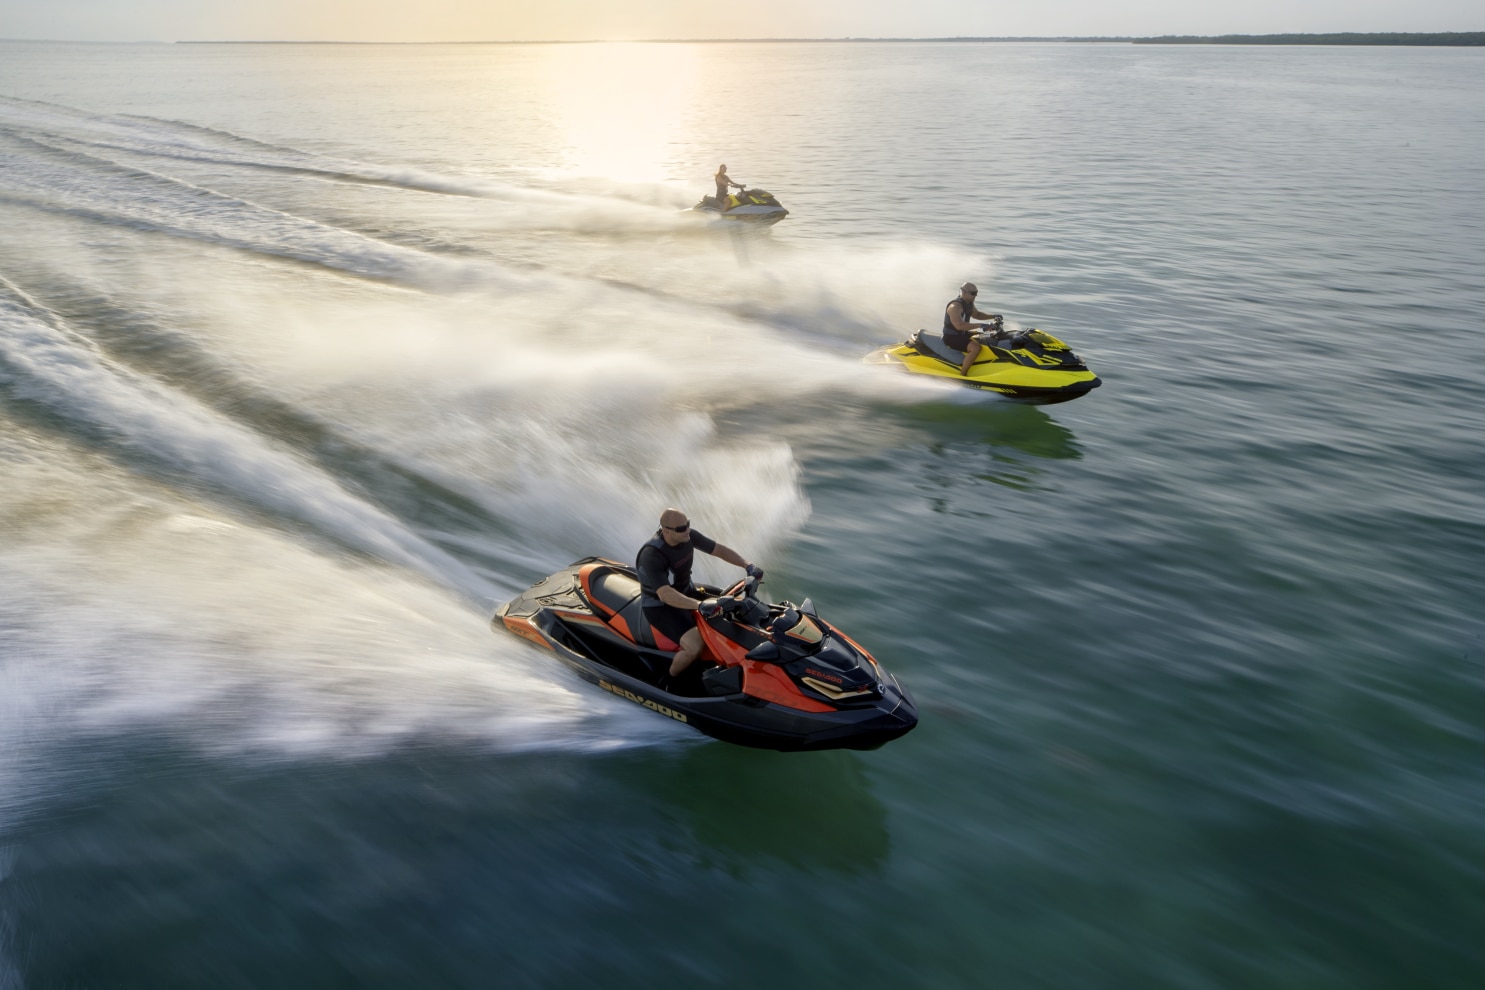 Three friends riding their Sea-Doo personal watercrafts